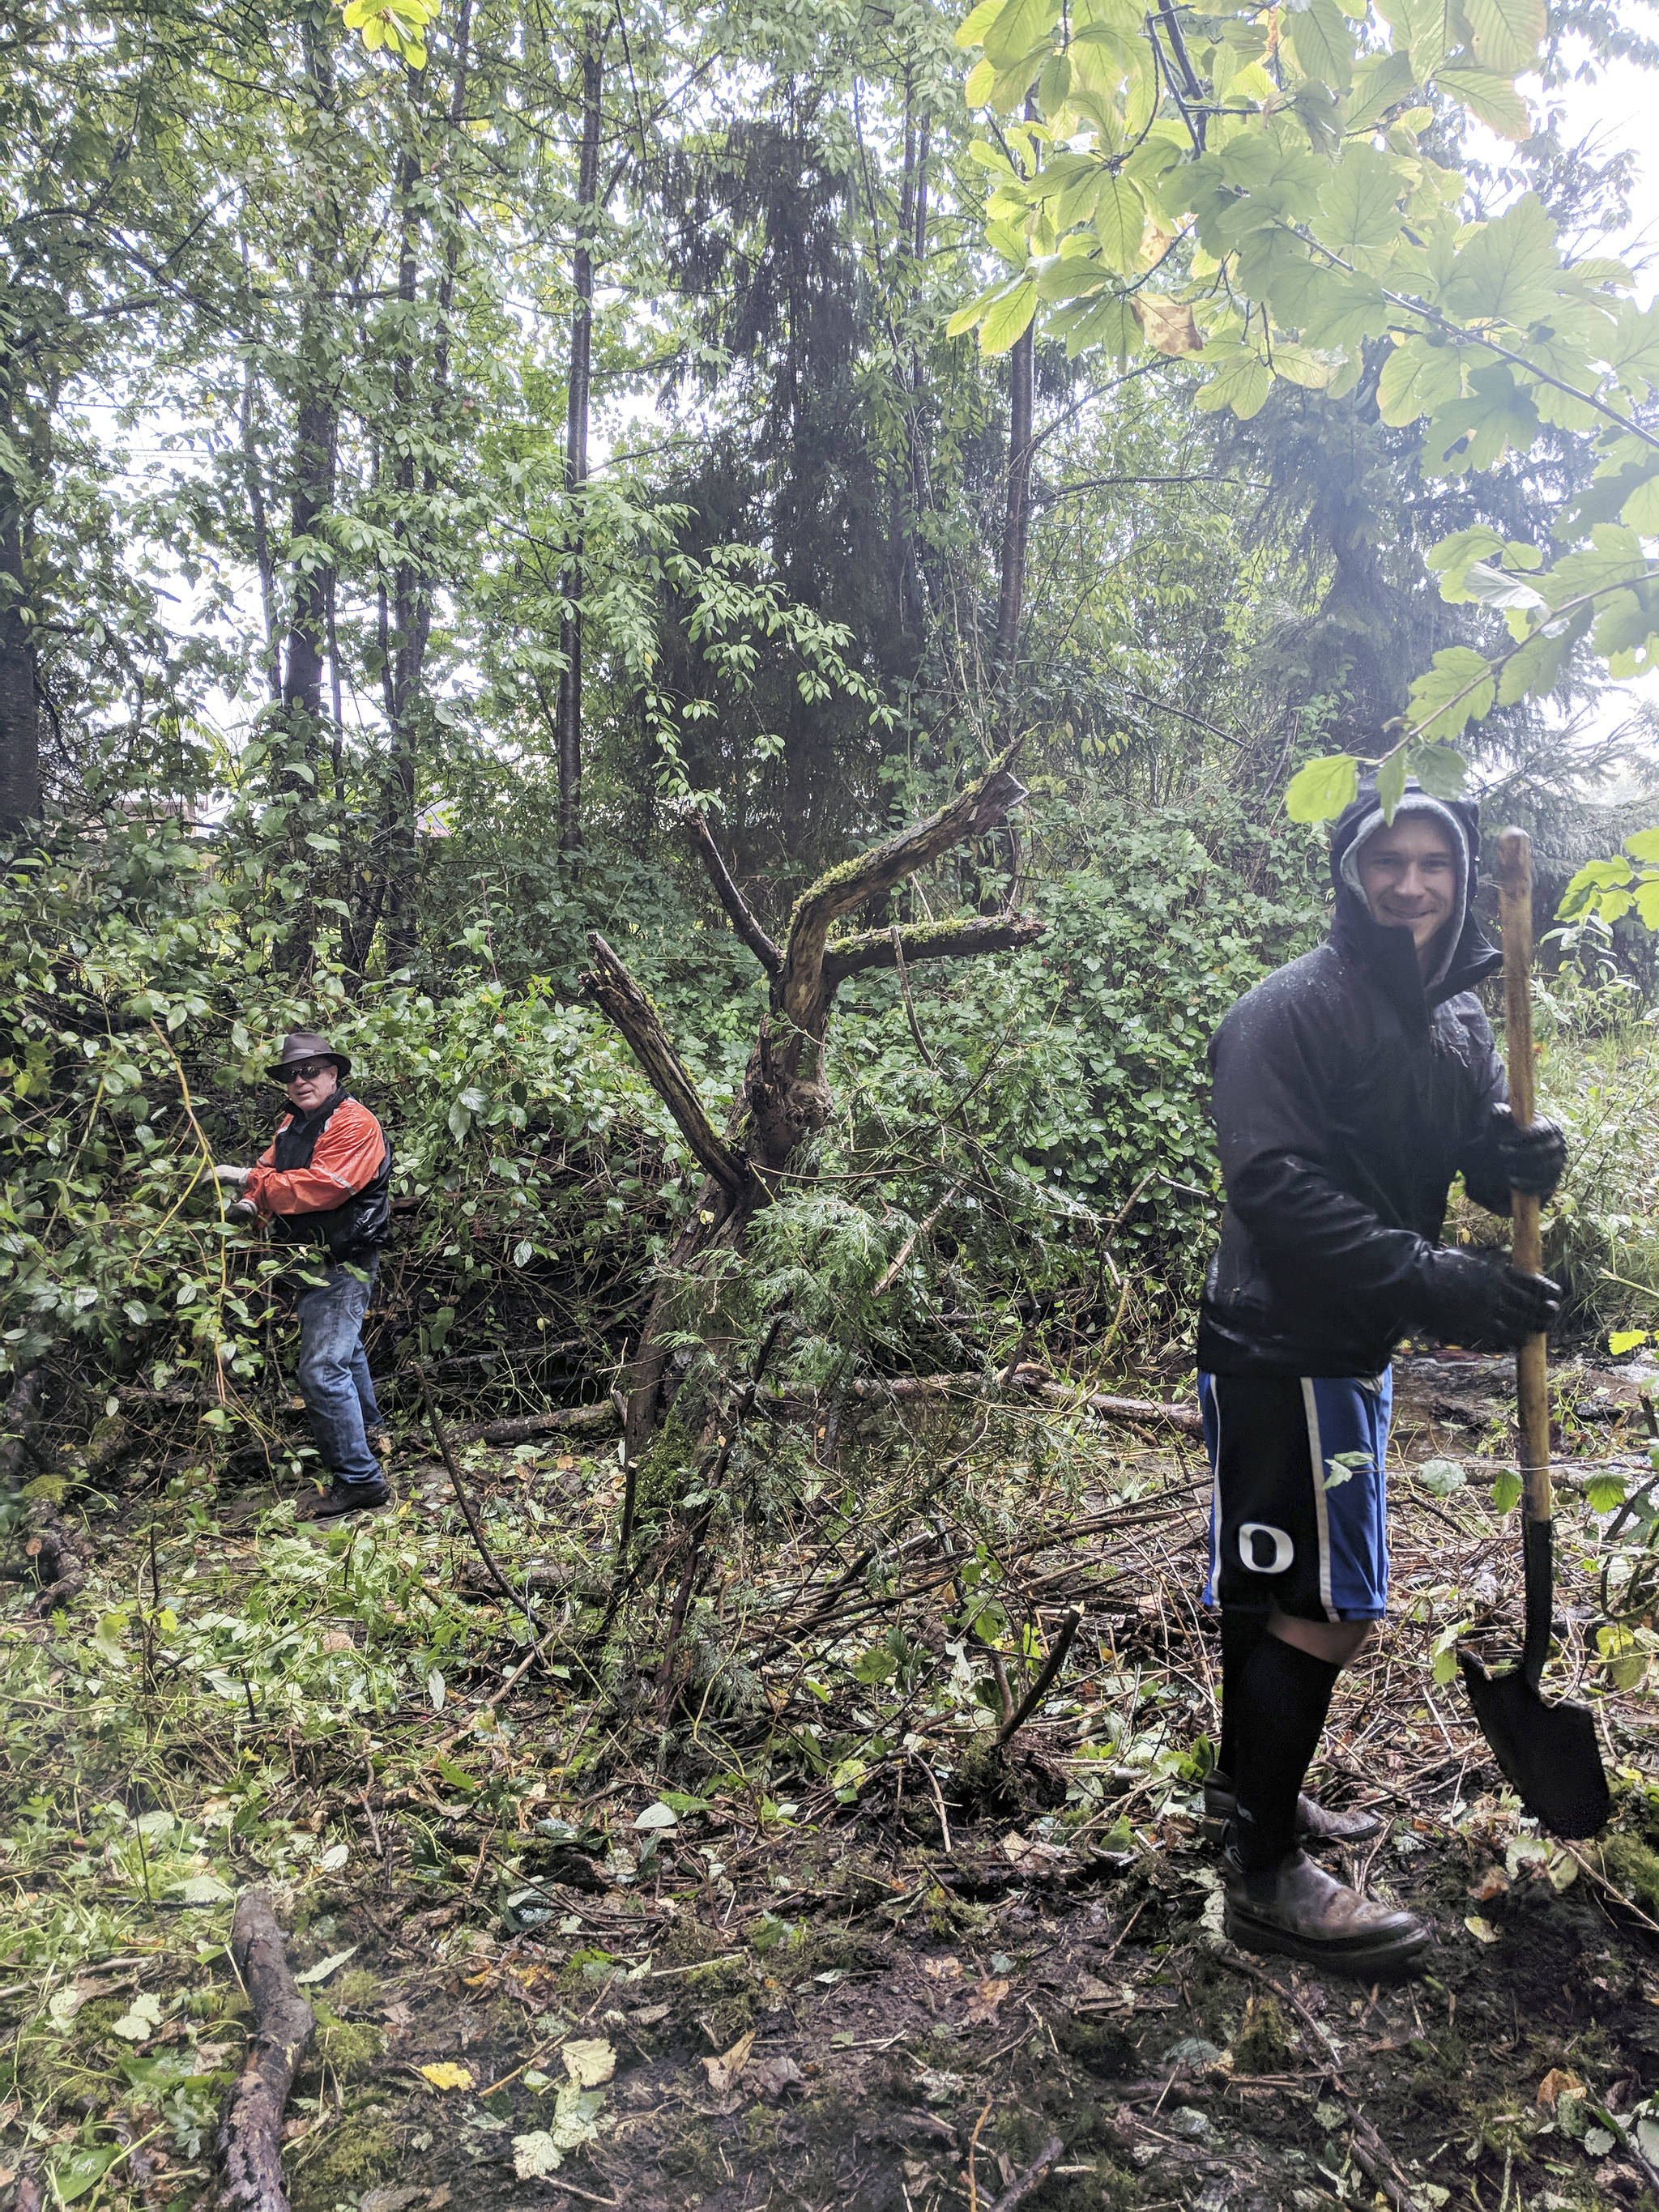 From left, Arlington Rotarians Lee Harman and Devin Brossard remove sticker bushes and invasive plant roots along the banks of Portage Creek.